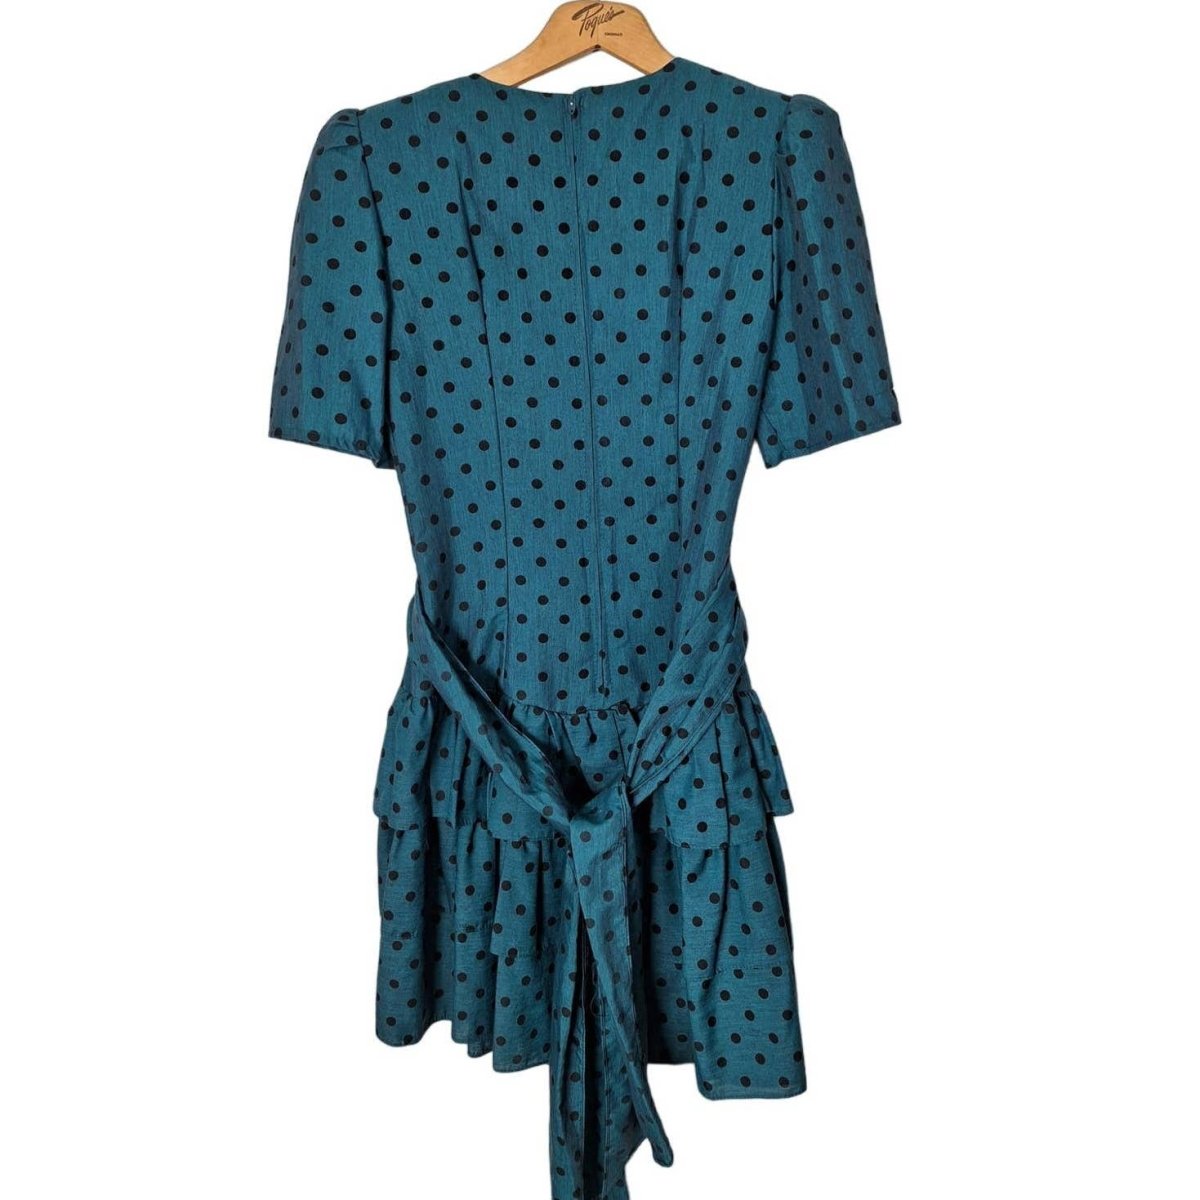 80s Teal/Black Polka Dot Ruffled Drop Waist Party Dress Size 7 Small - themallvintage The Mall Vintage